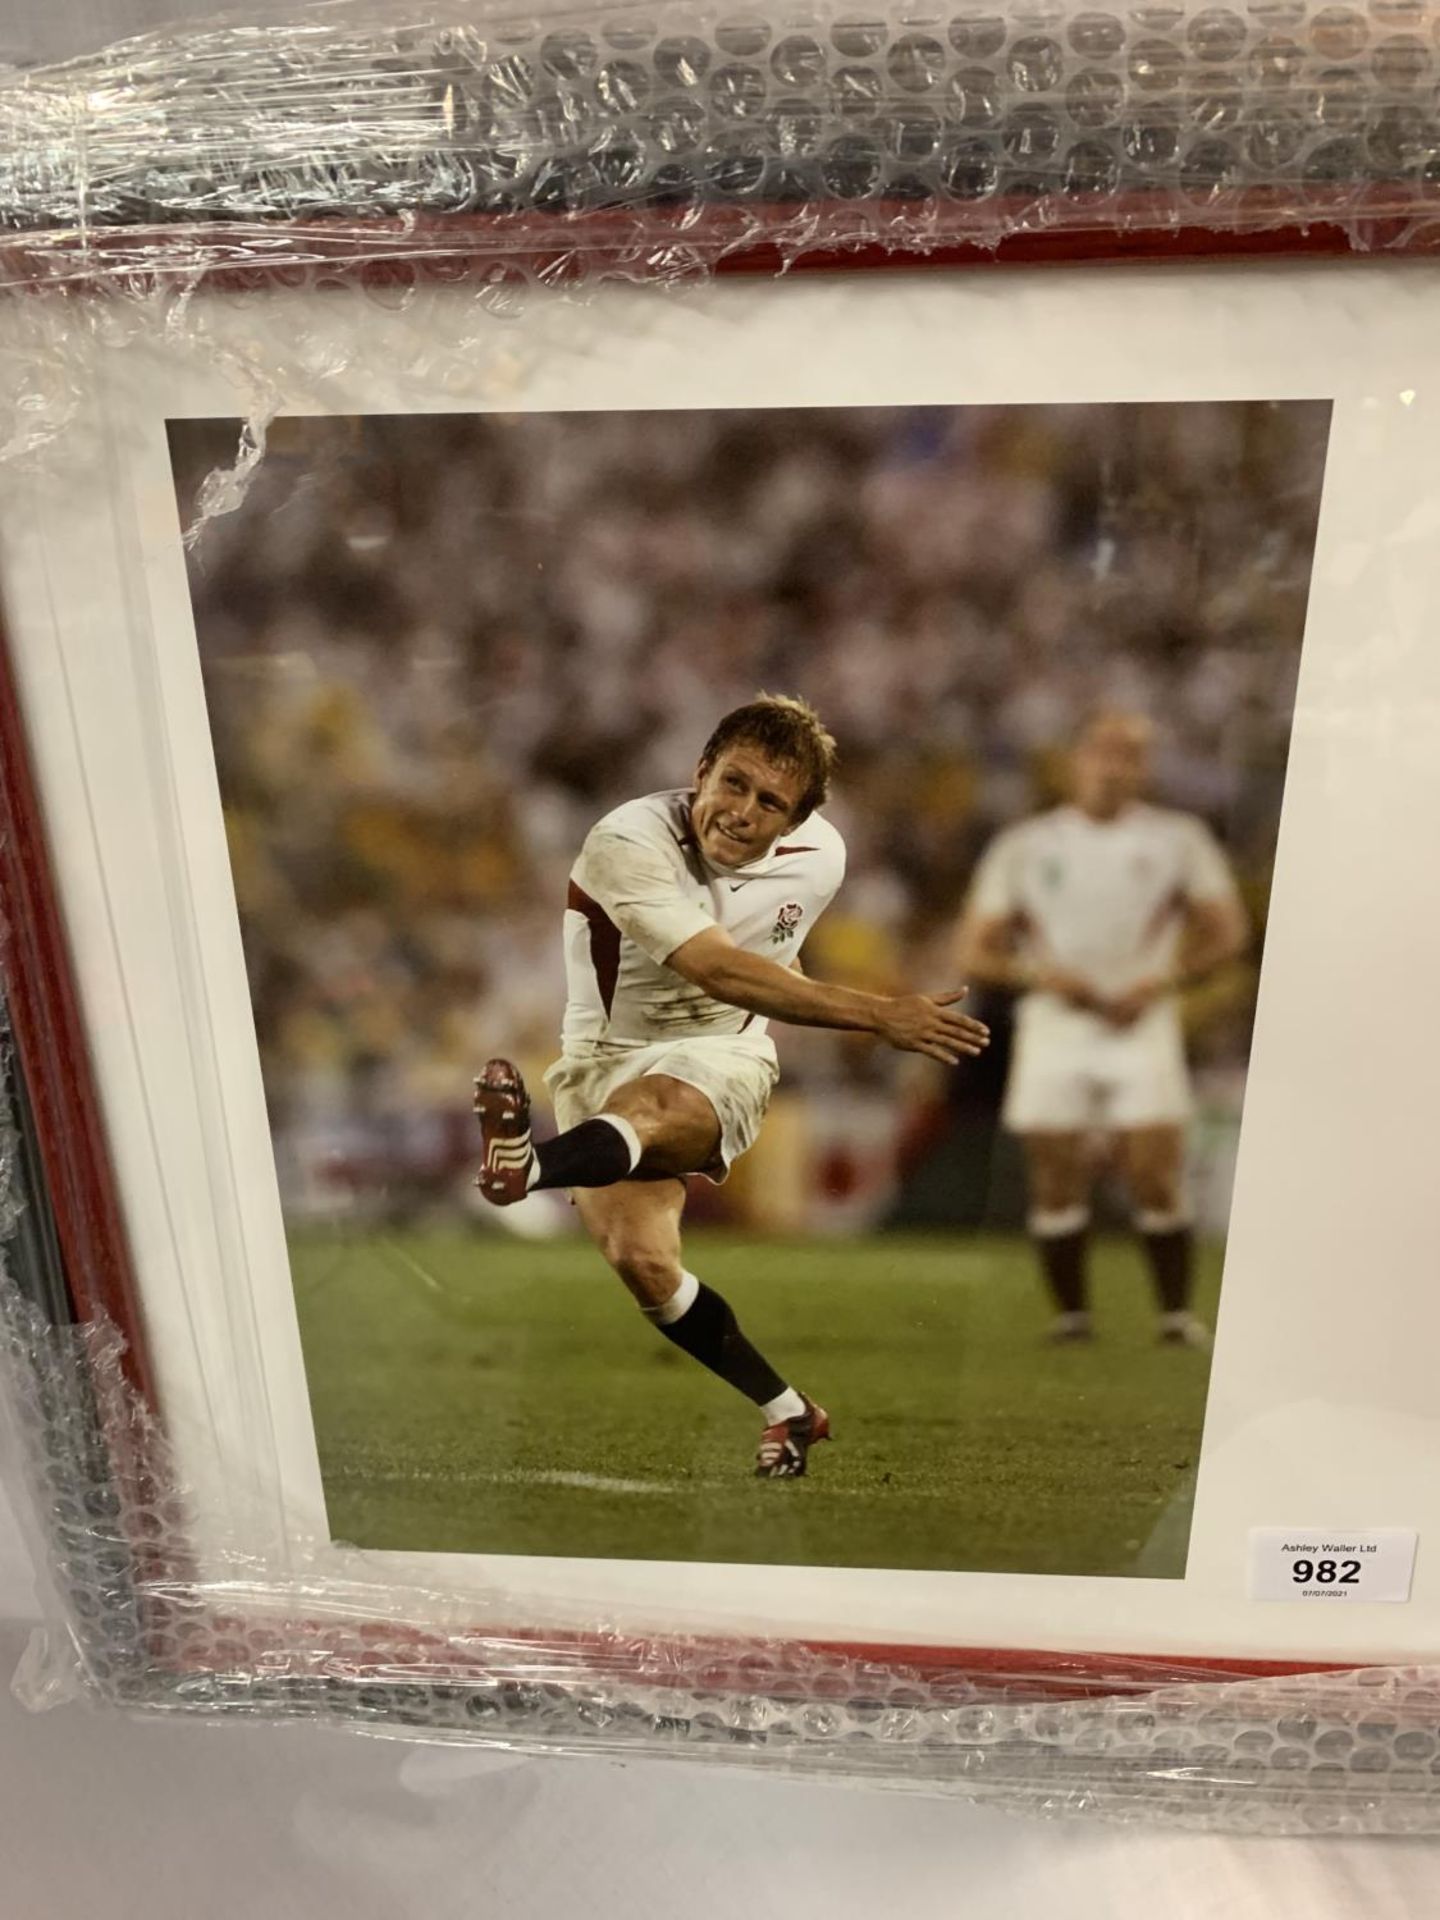 A FRAMED ENGLAND RUGBY WORLD CUP WINNERS 2003 MONTAGE - Image 2 of 4